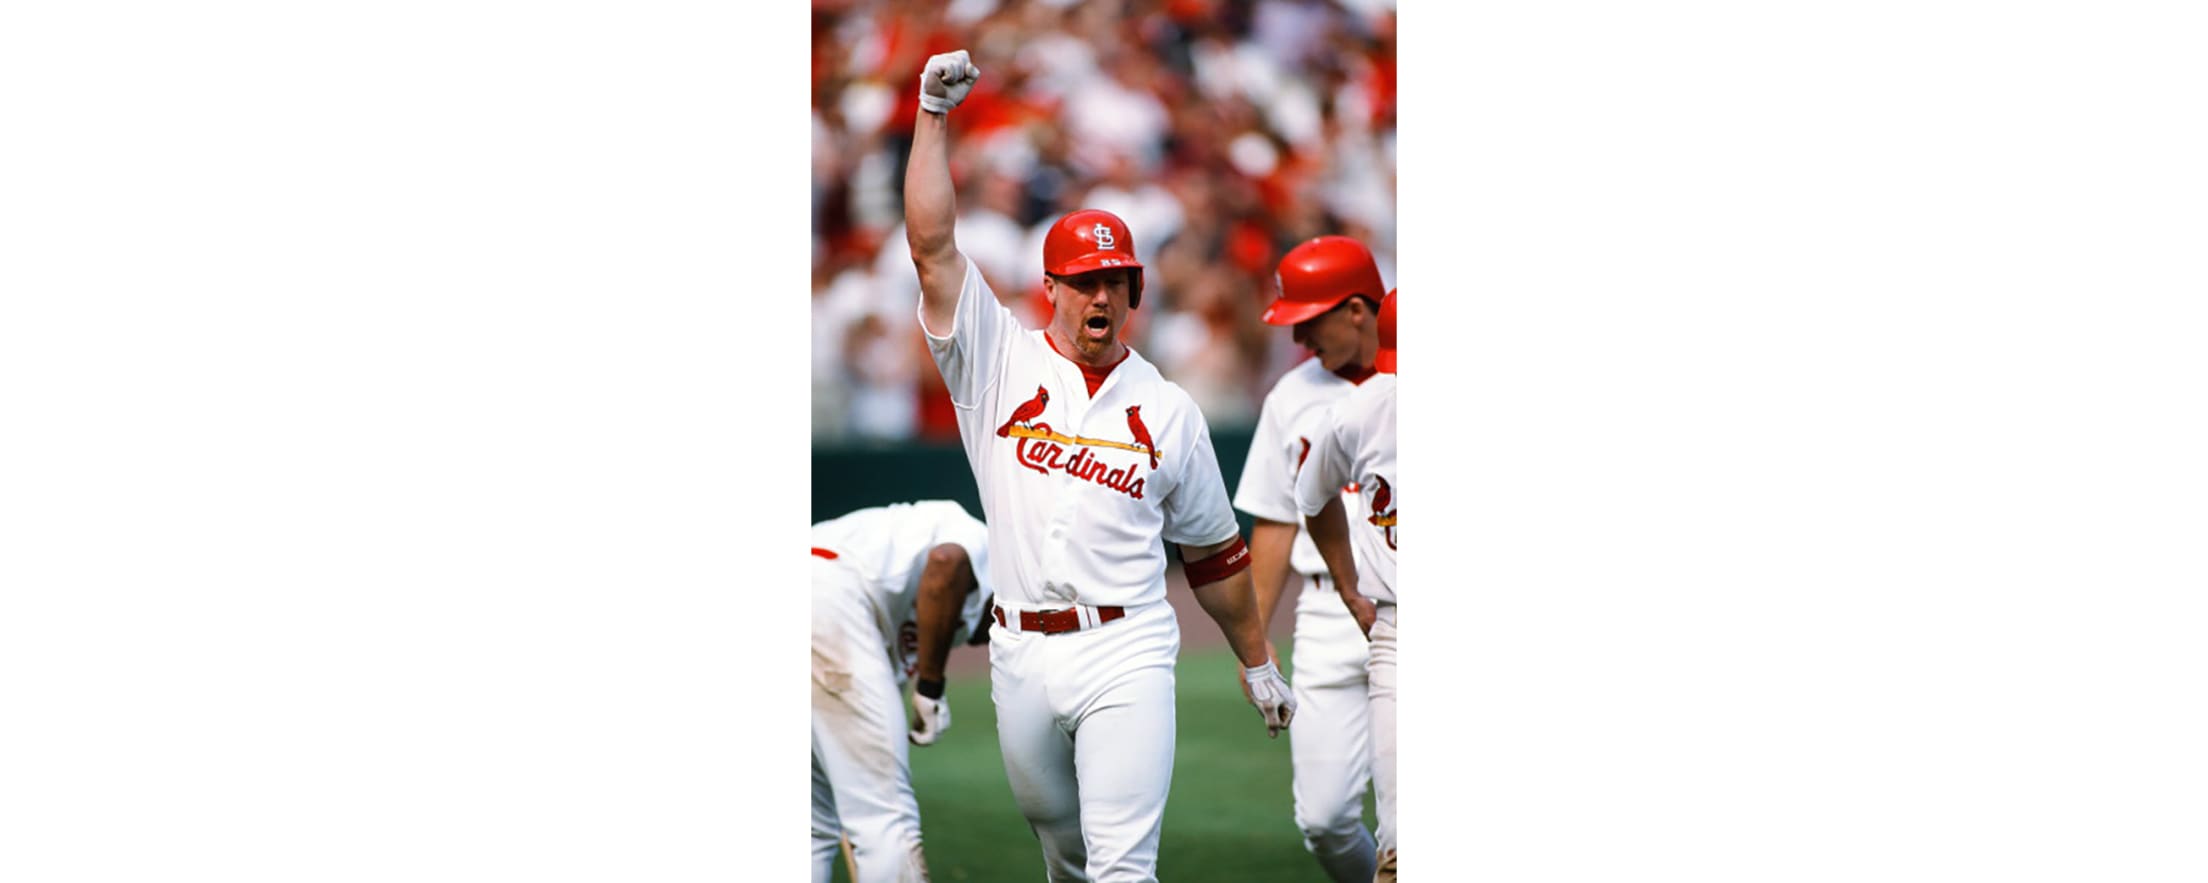 Mark McGwire of the St. Louis Cardinals becomes the 16th major